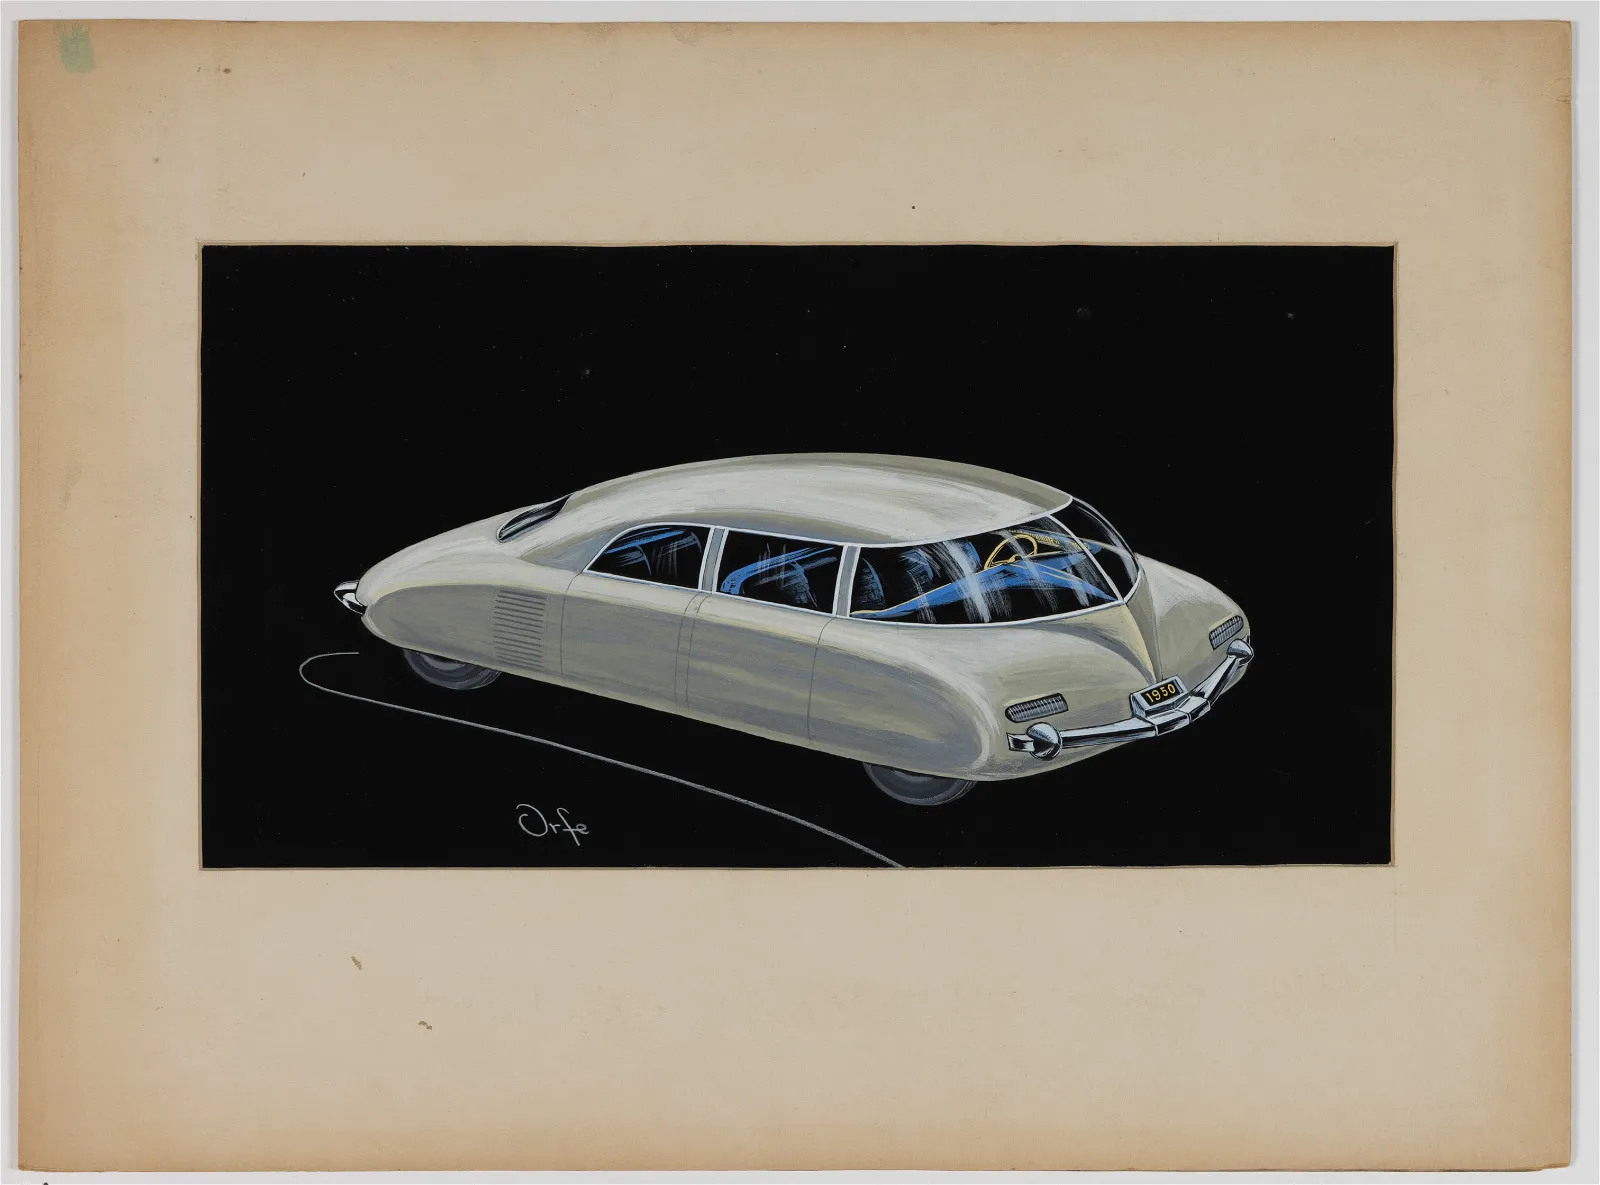 John Orfe watercolour and charcoal on paper of a futuristic sedan, published in The Philadelphia Inquirer in 1946, $1100 at Jeffrey S. Evans.